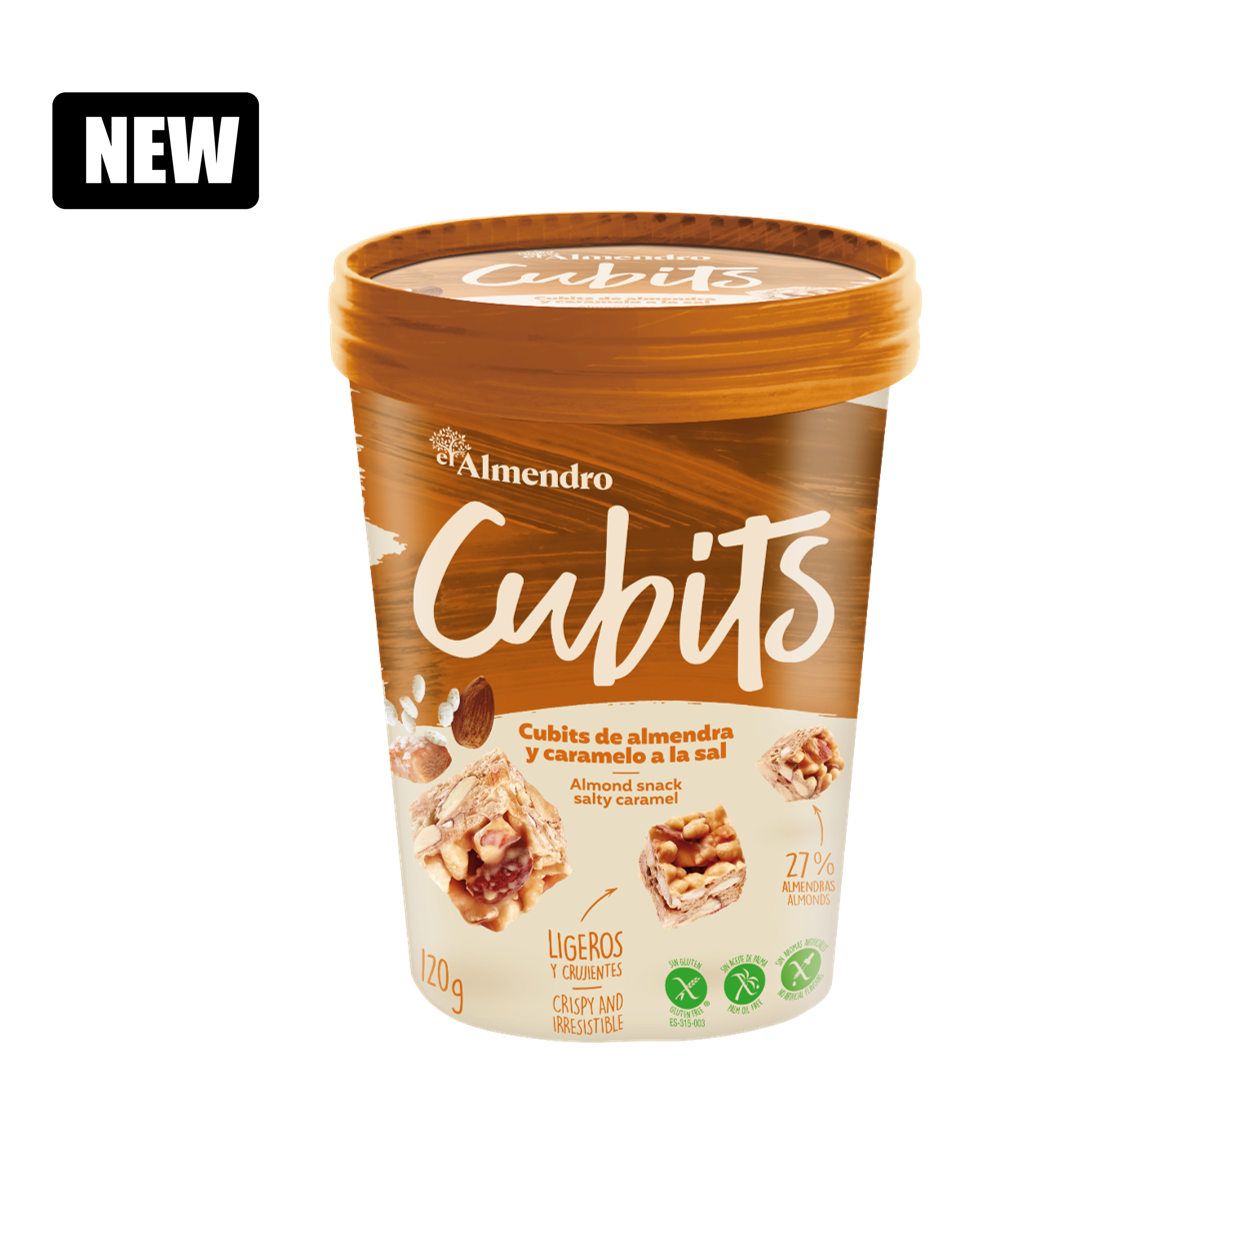 Cubits almonds with salty caramel flavour